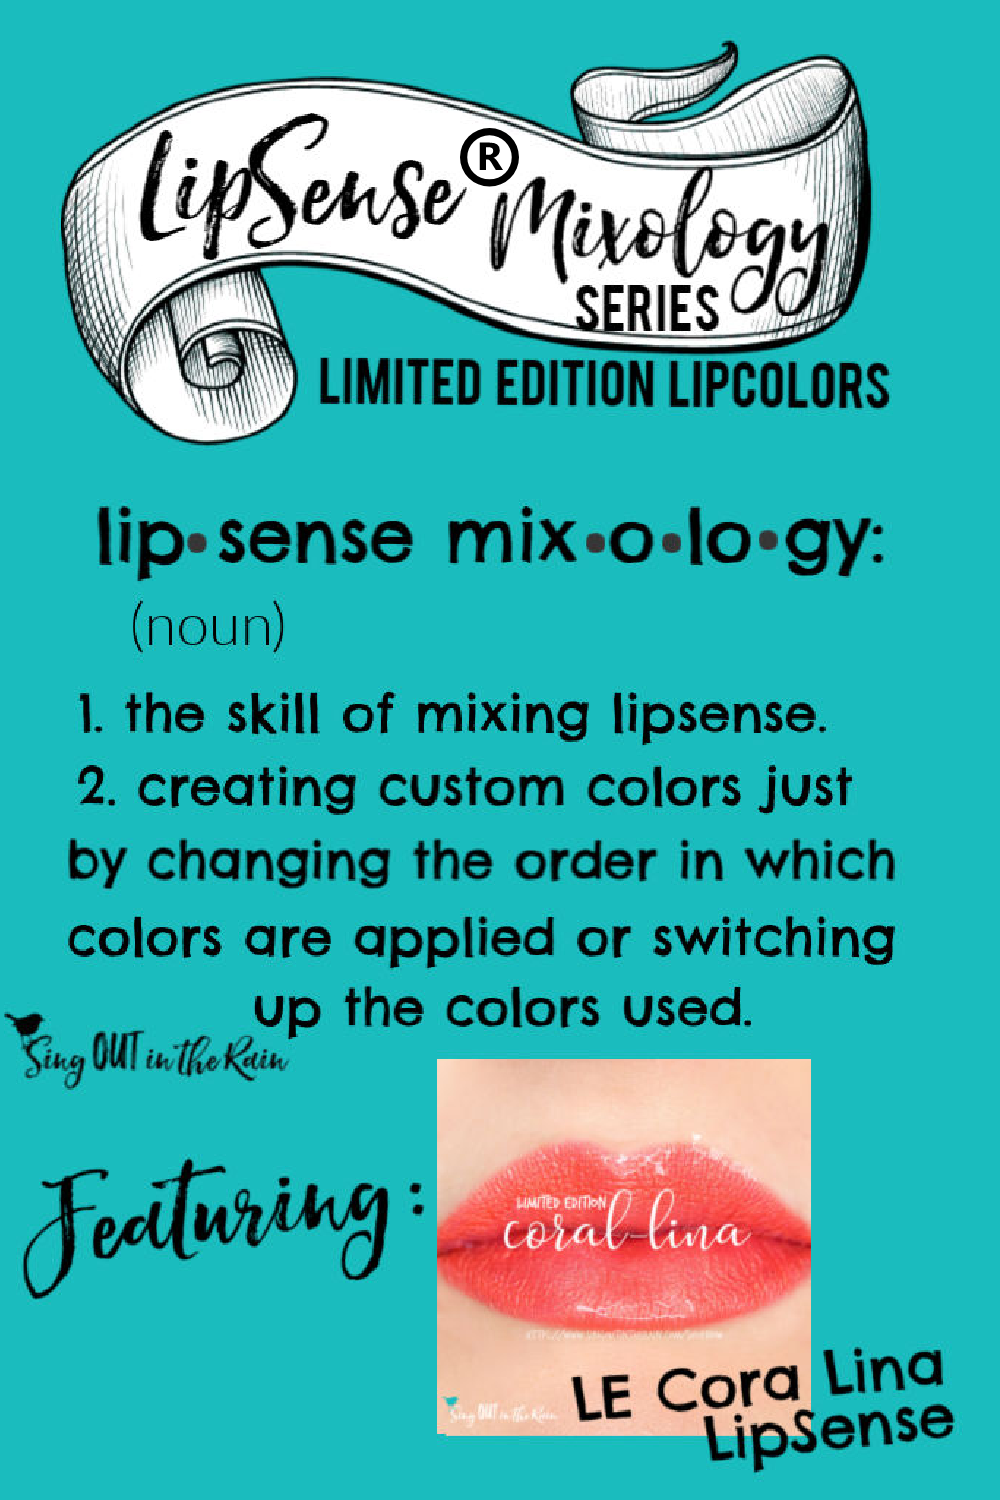 The Ultimate Guide to Coral-Lina LipSense Mixology